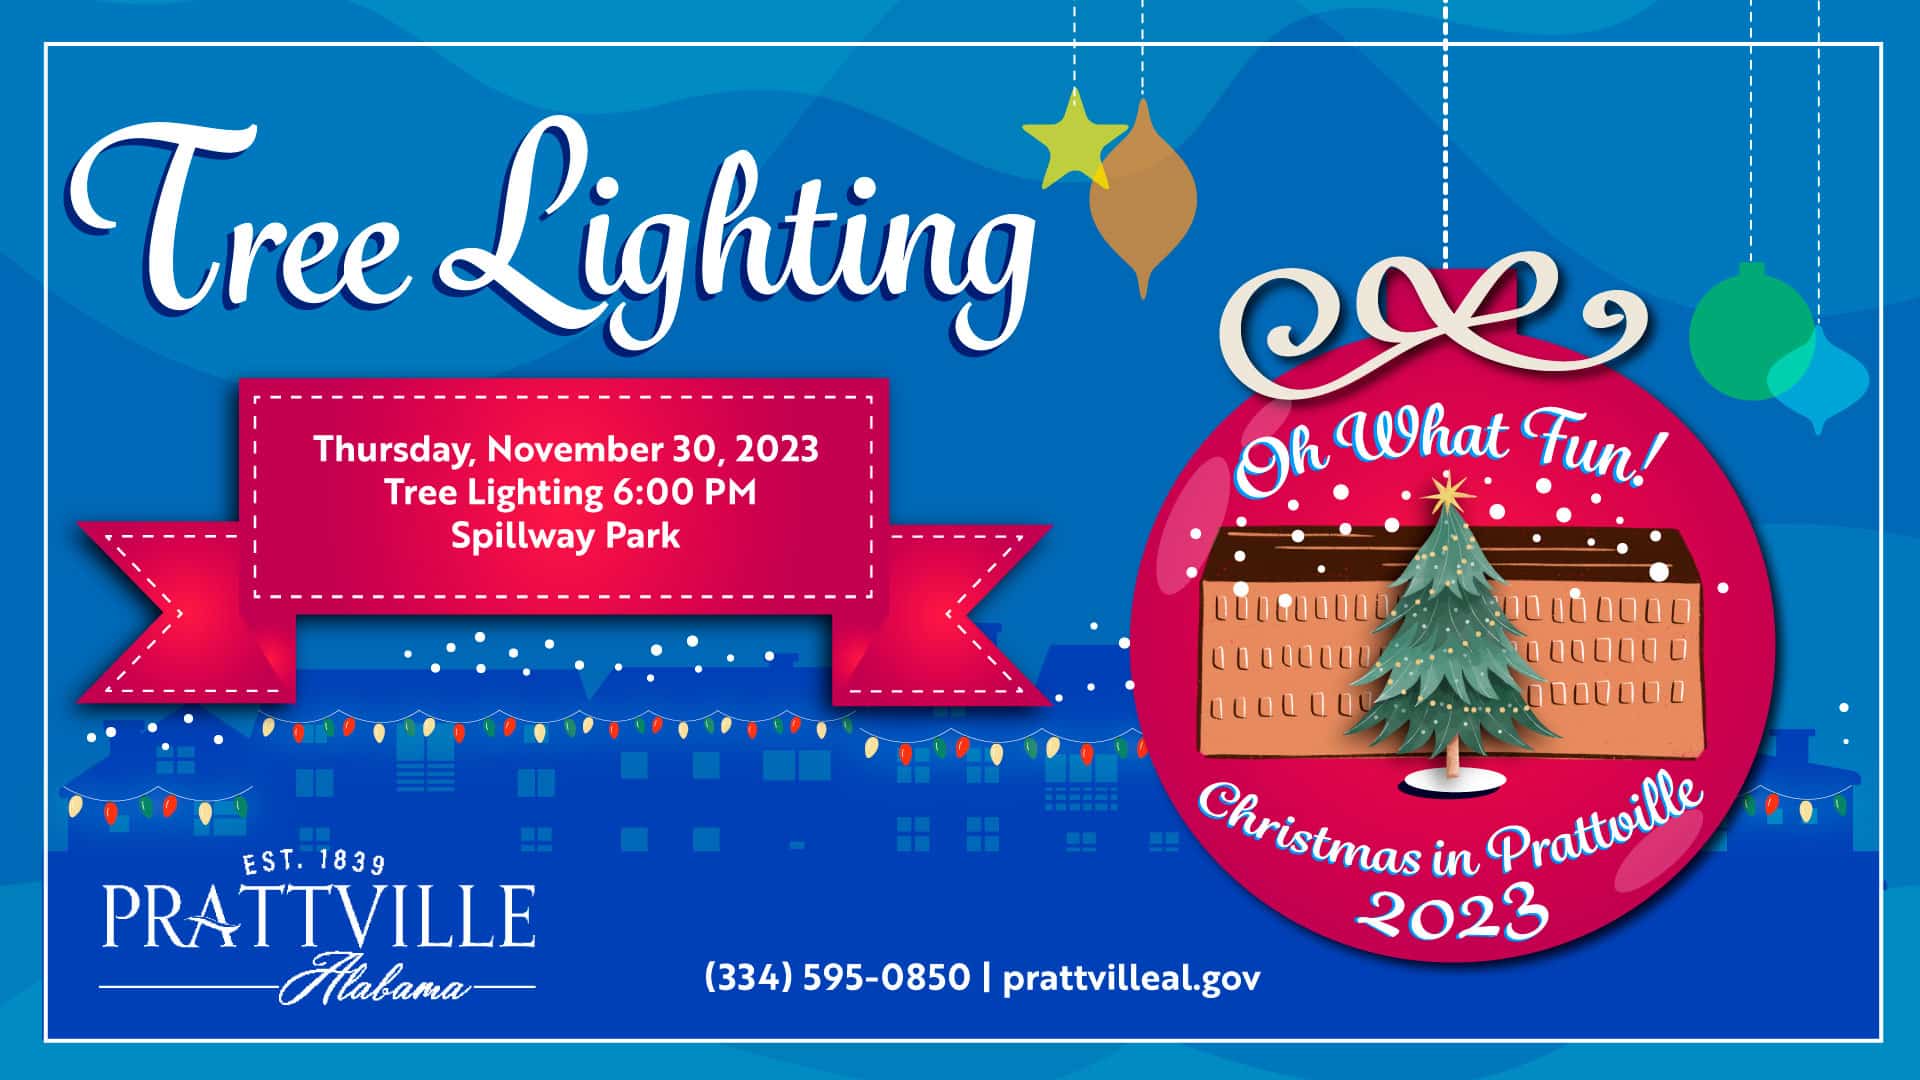 Christmas in Prattville Tree Lighting updated hours.